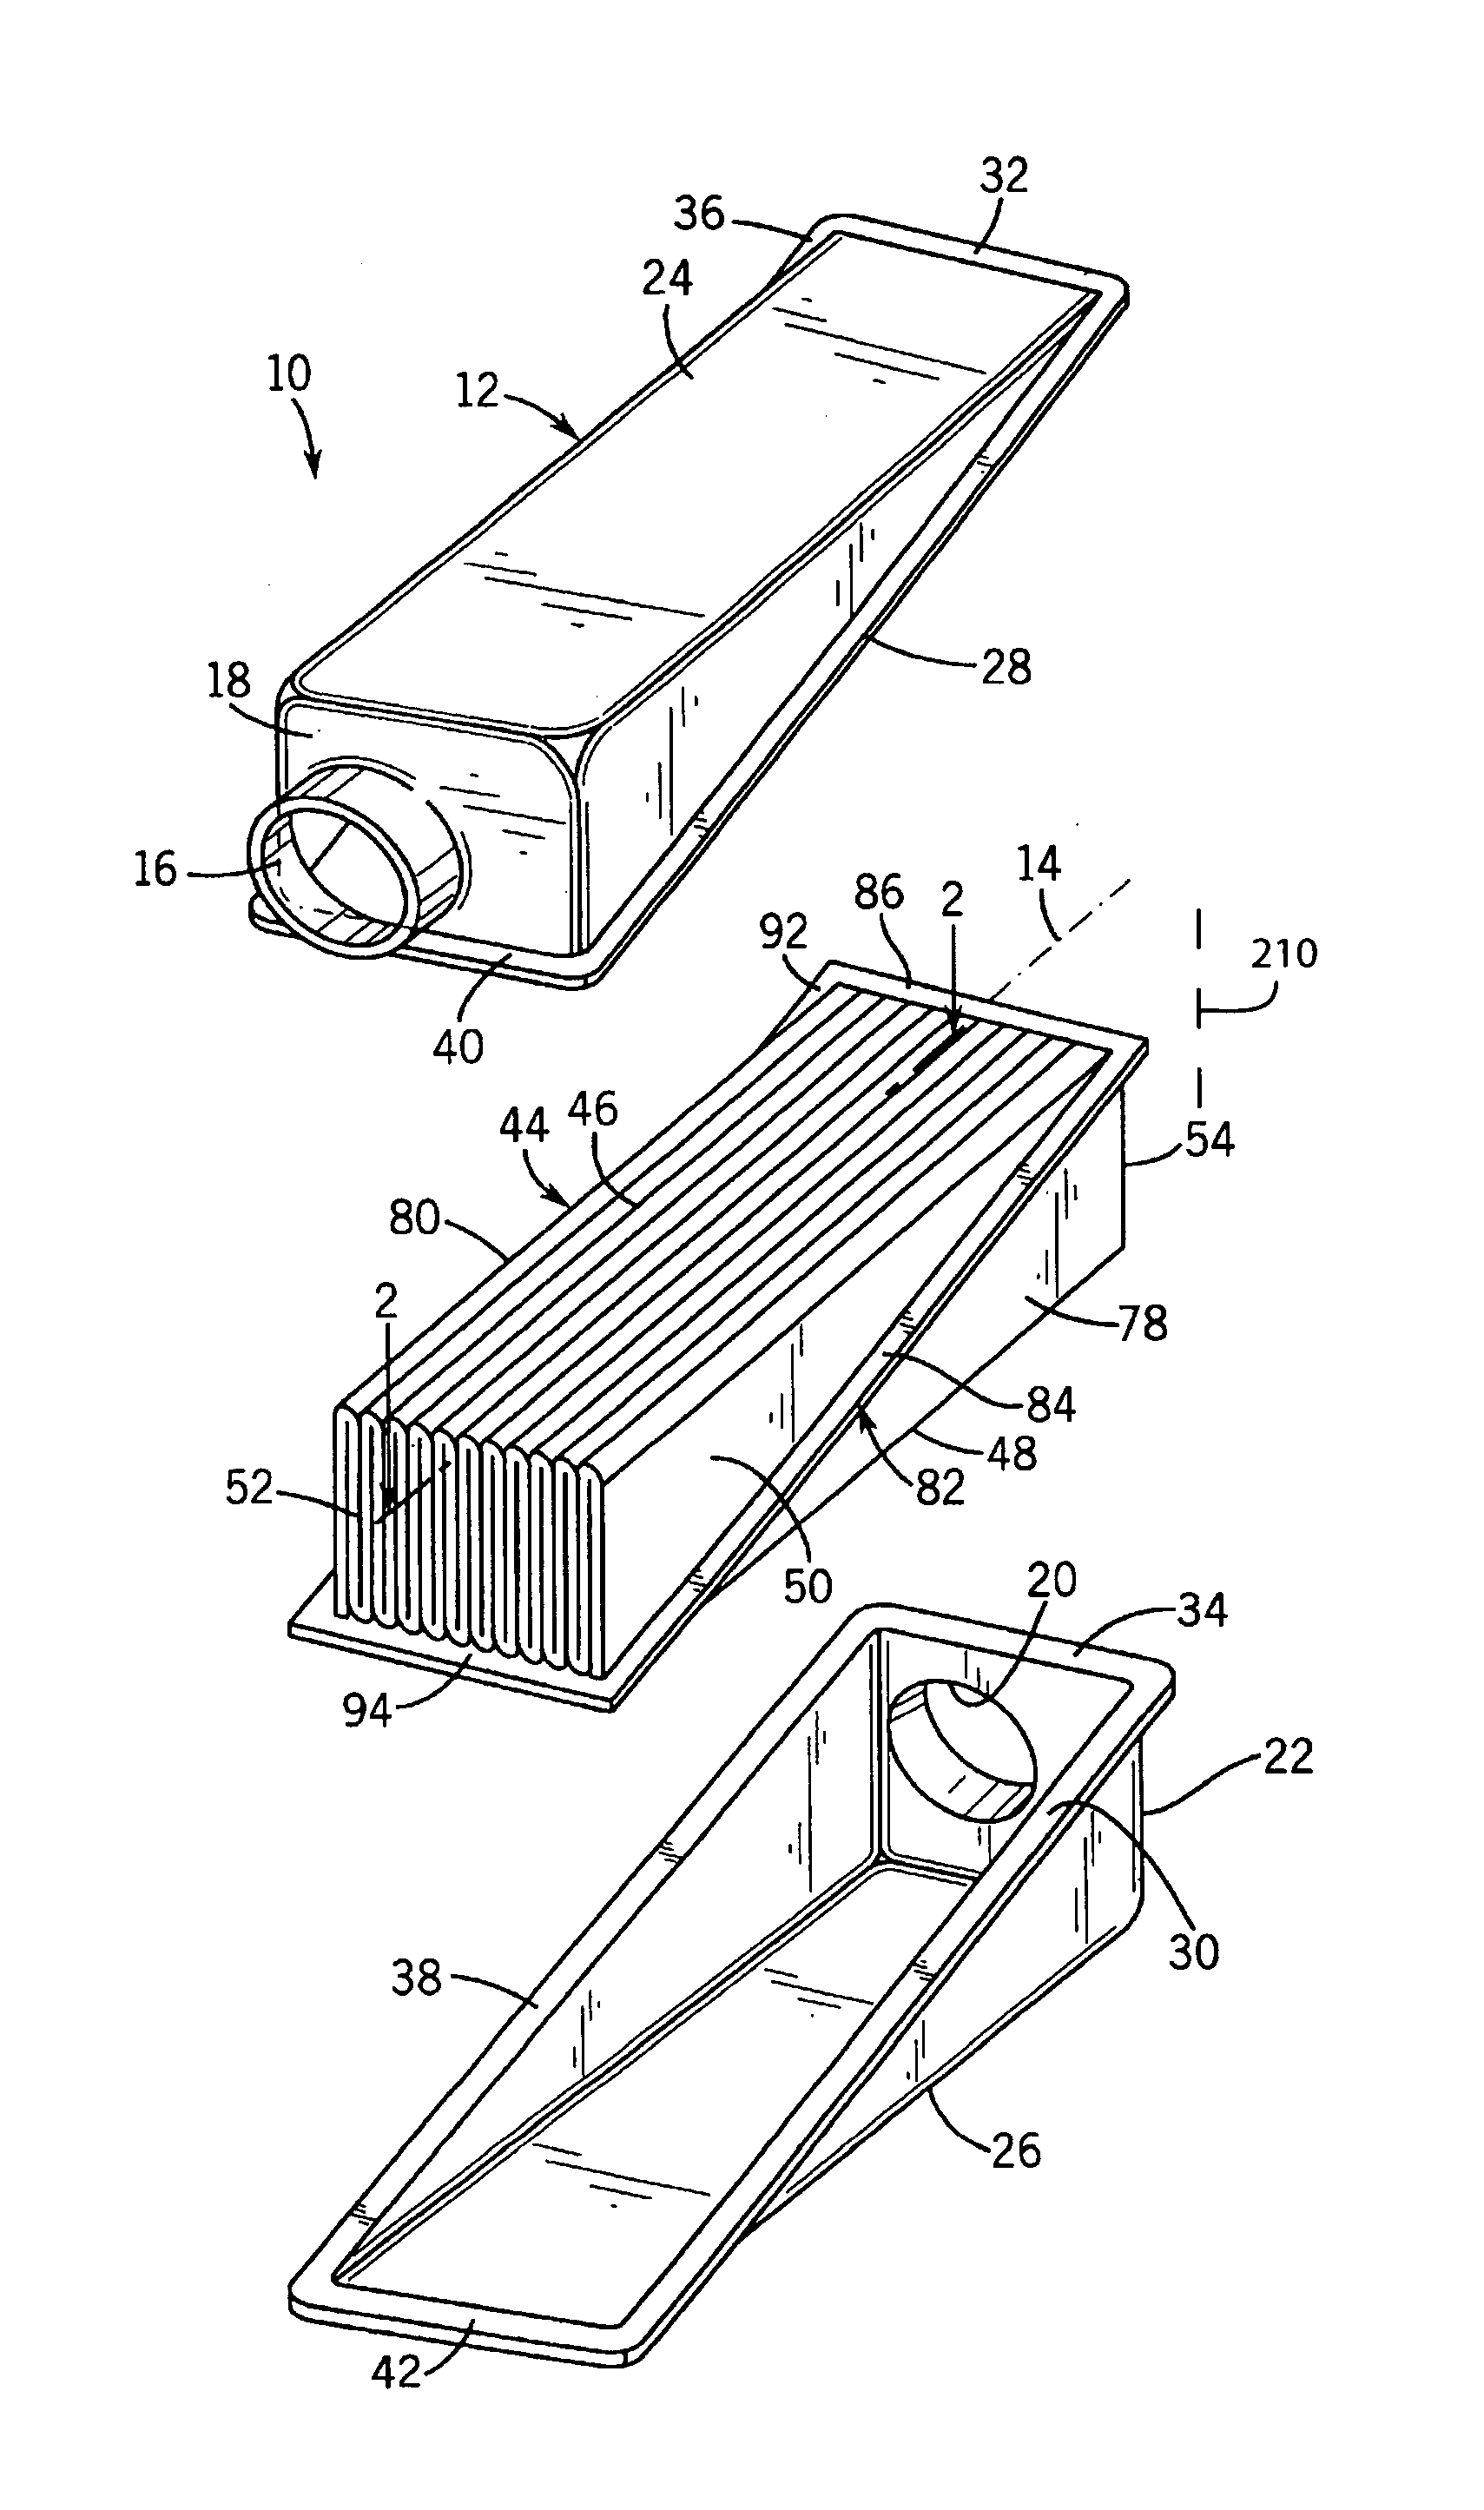 Direct flow filter with sealing mechanism